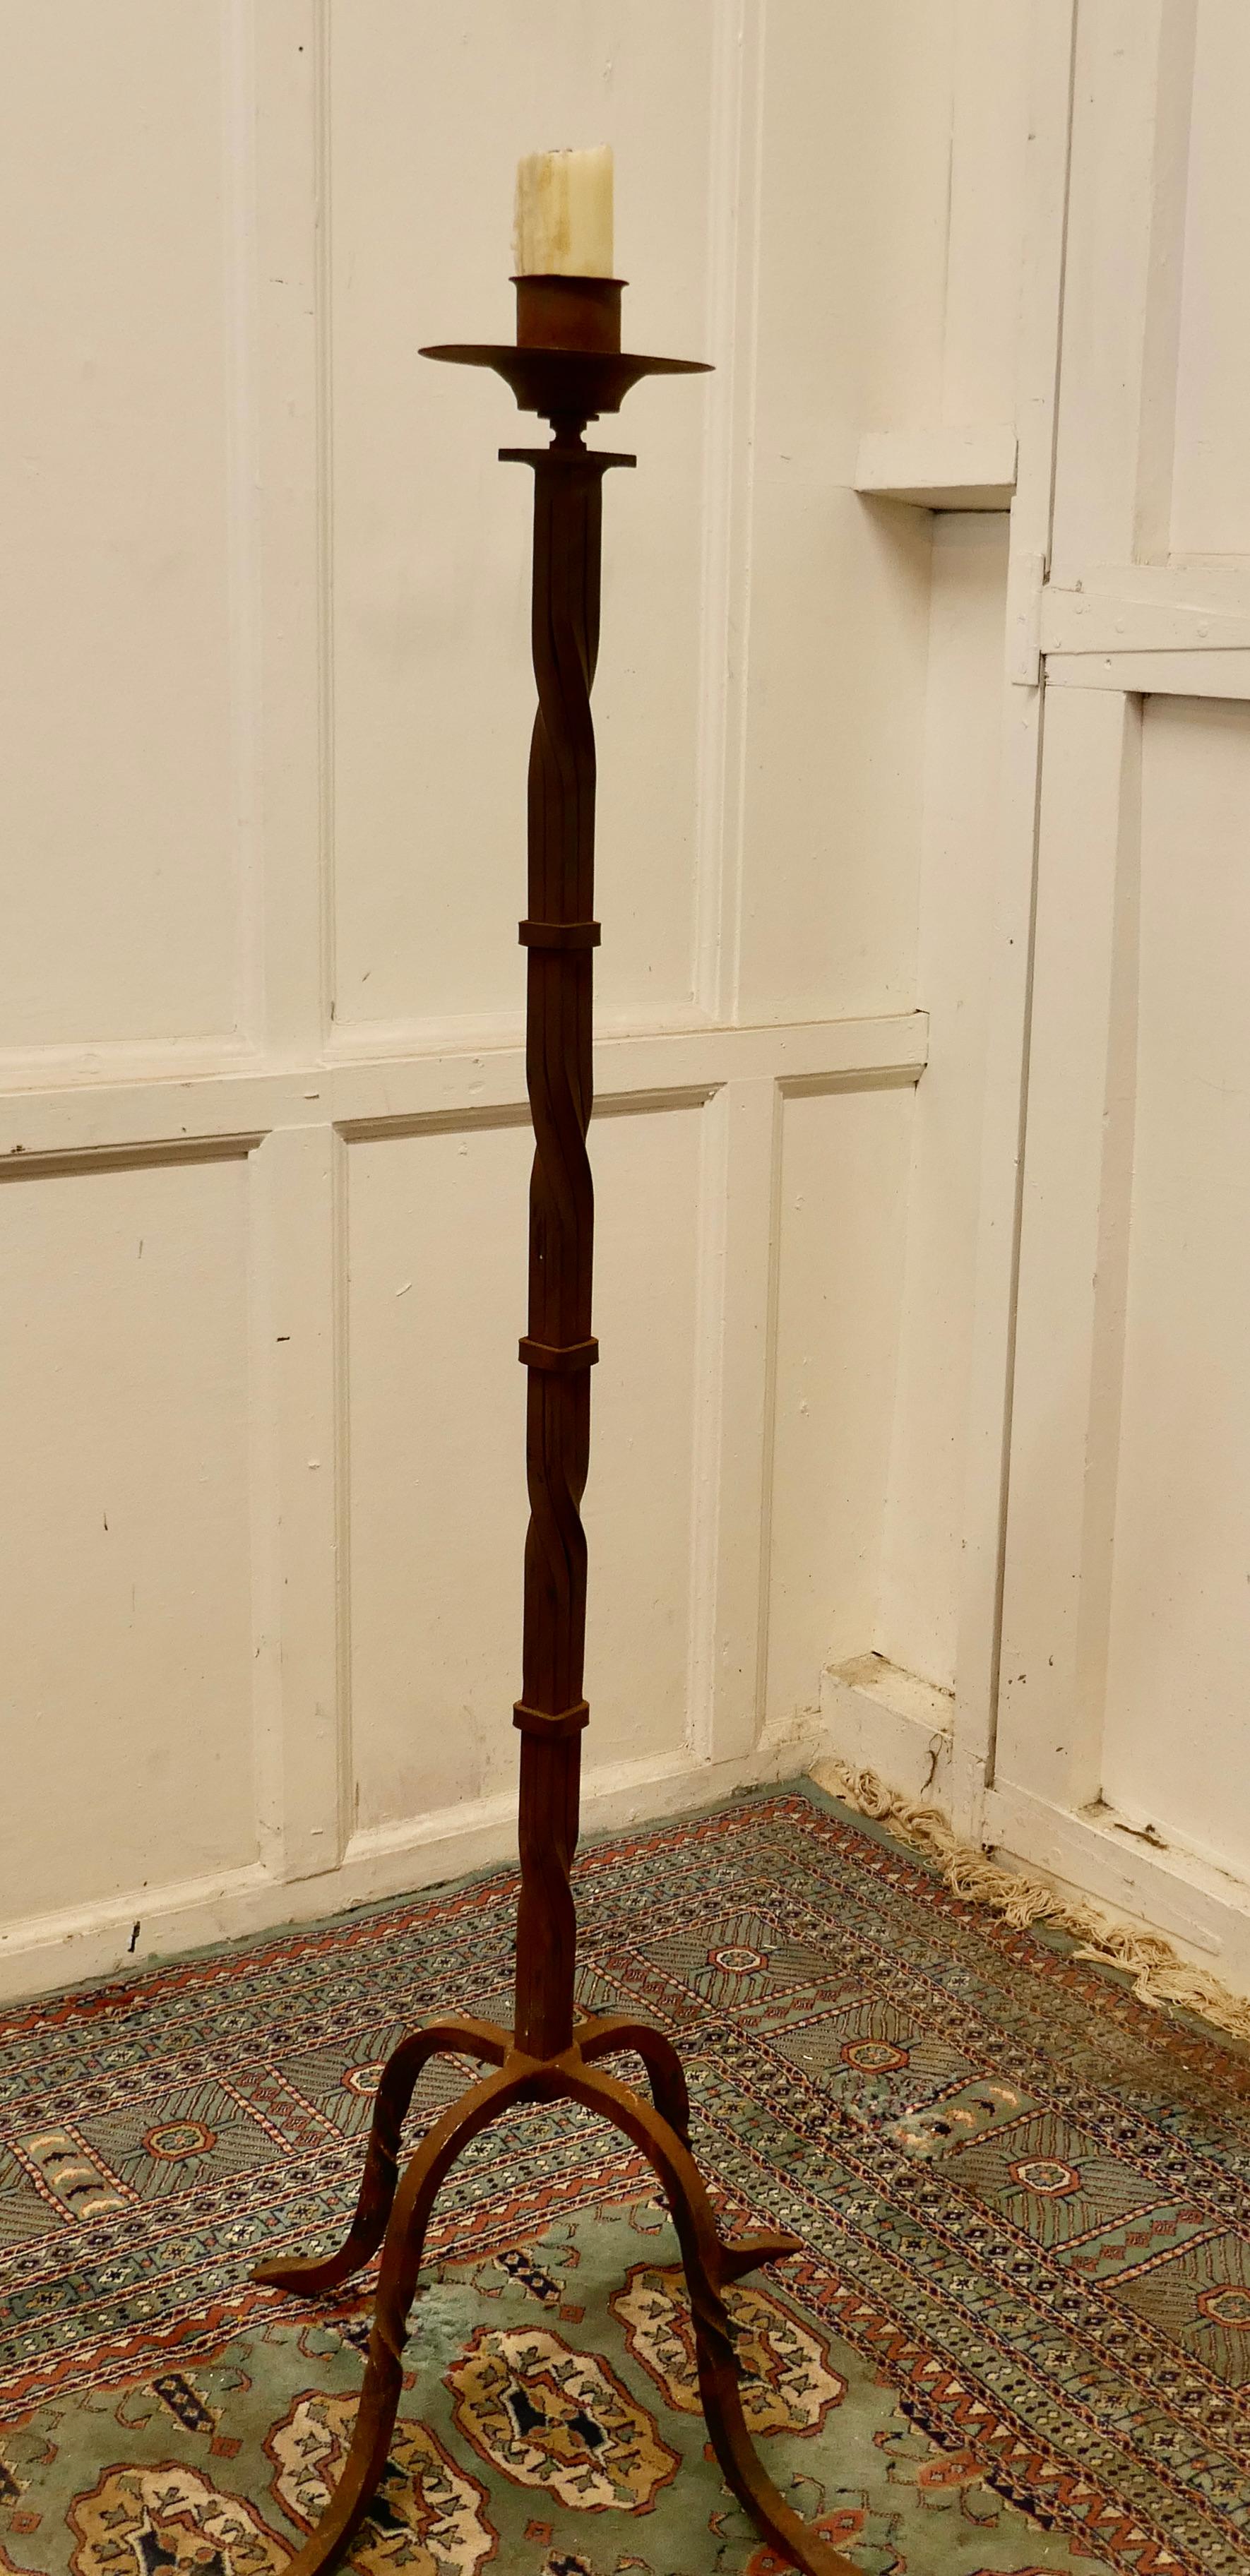 Blacksmith made Gothic wrought iron floor lamp


This is a very unusual Gothic Wrought Iron Floor Lamp the Stand is blacksmith made, it stands on 4 feet and takes a 2” diameter wax candle which sits in the sconce on a large saucer
An unusual